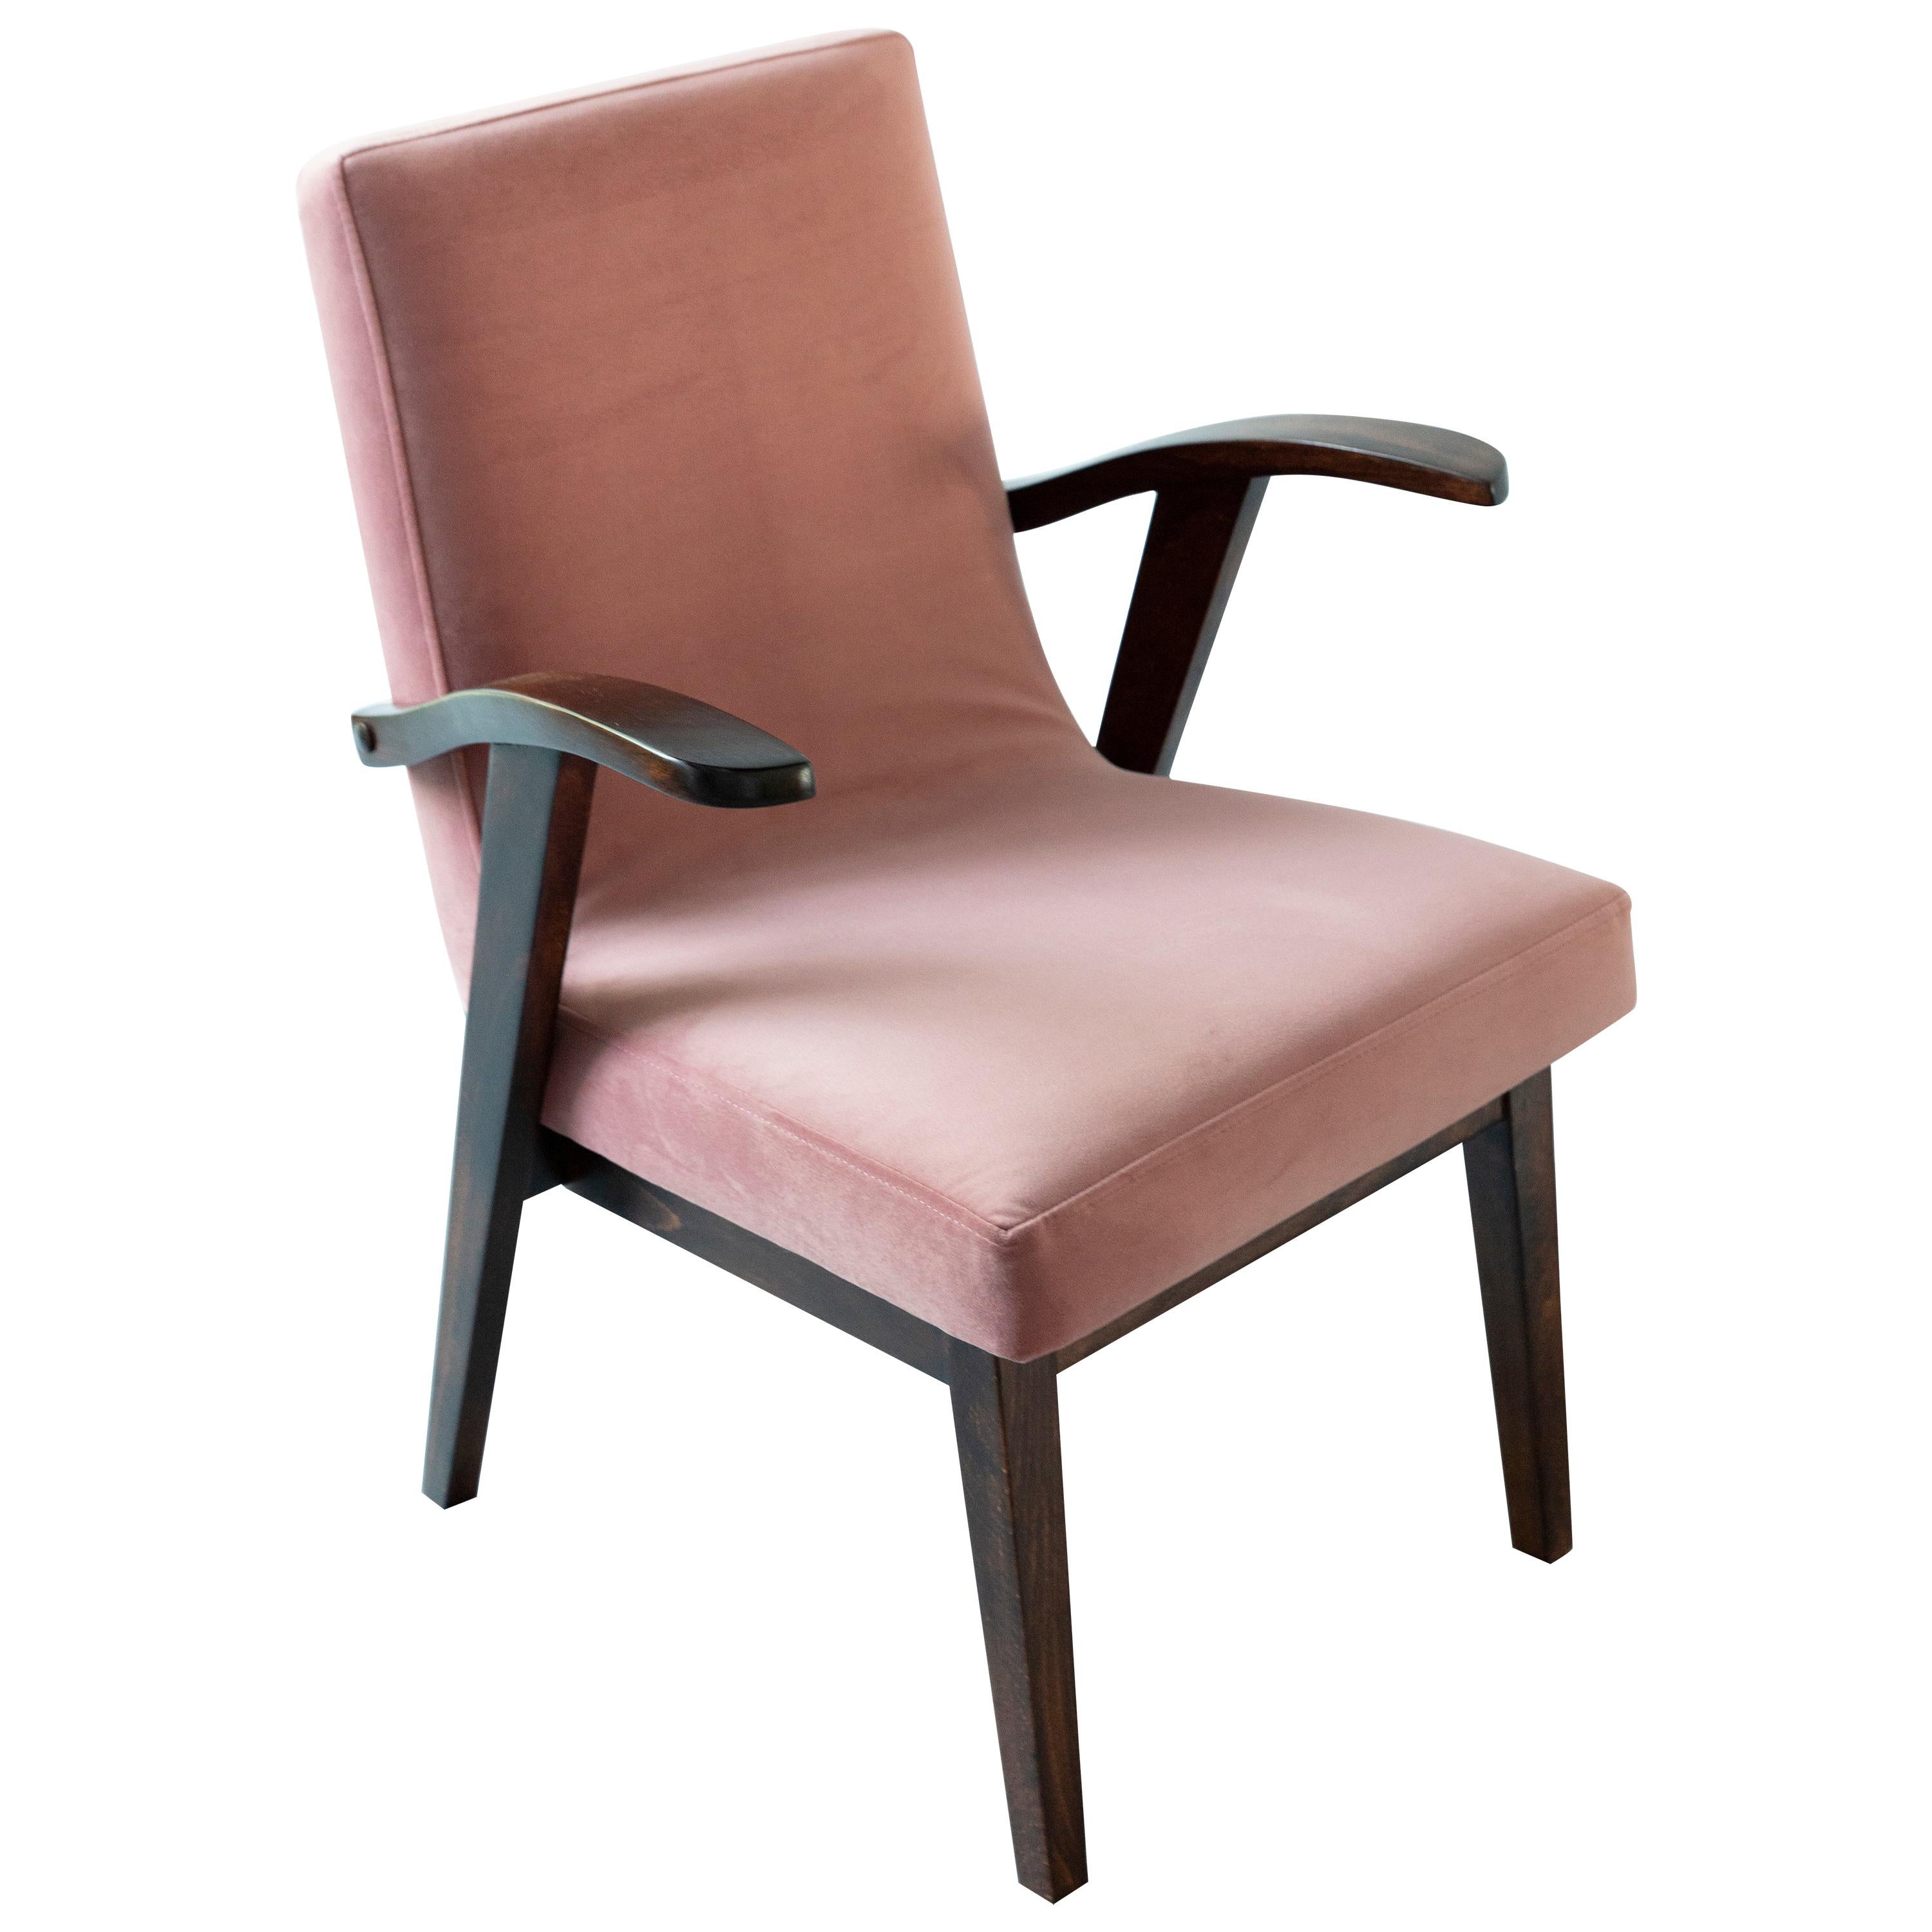 20th Century Vintage Armchair in Dusty Pink Velvet by Mieczyslaw Puchala, 1960s For Sale